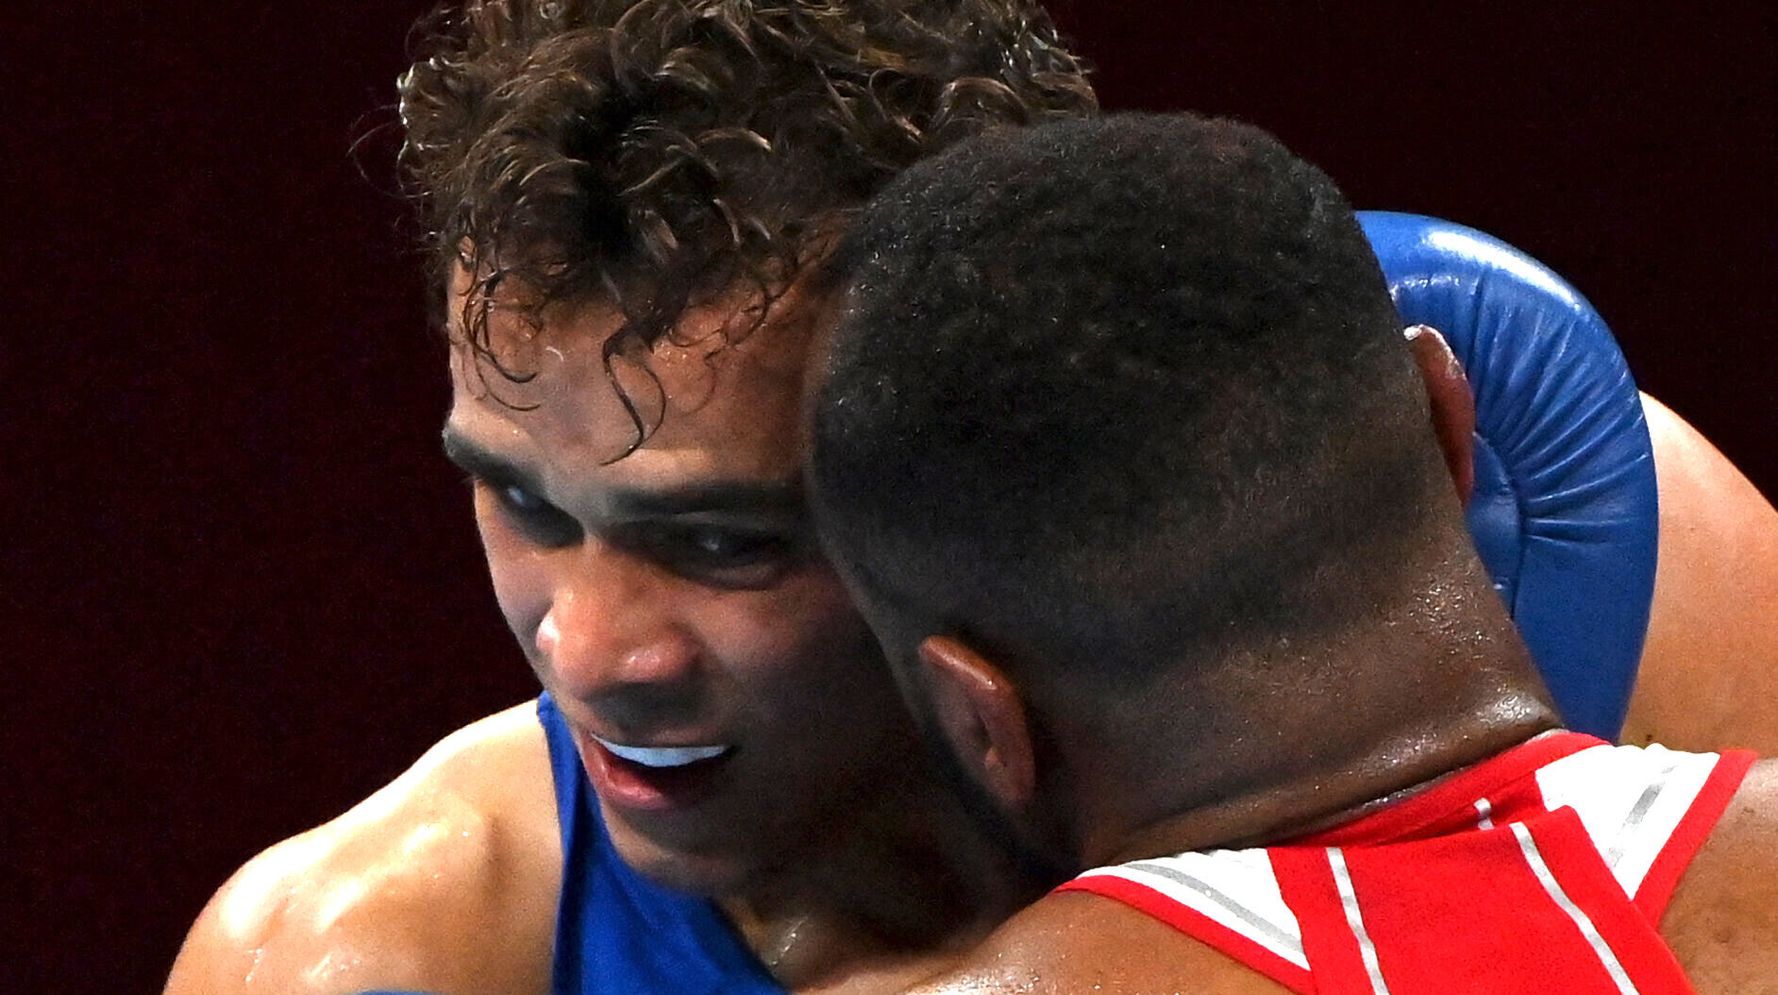 Boxer Channels Mike Tyson With Attempted Ear Bite: 'Olympic-Sized Chomp'